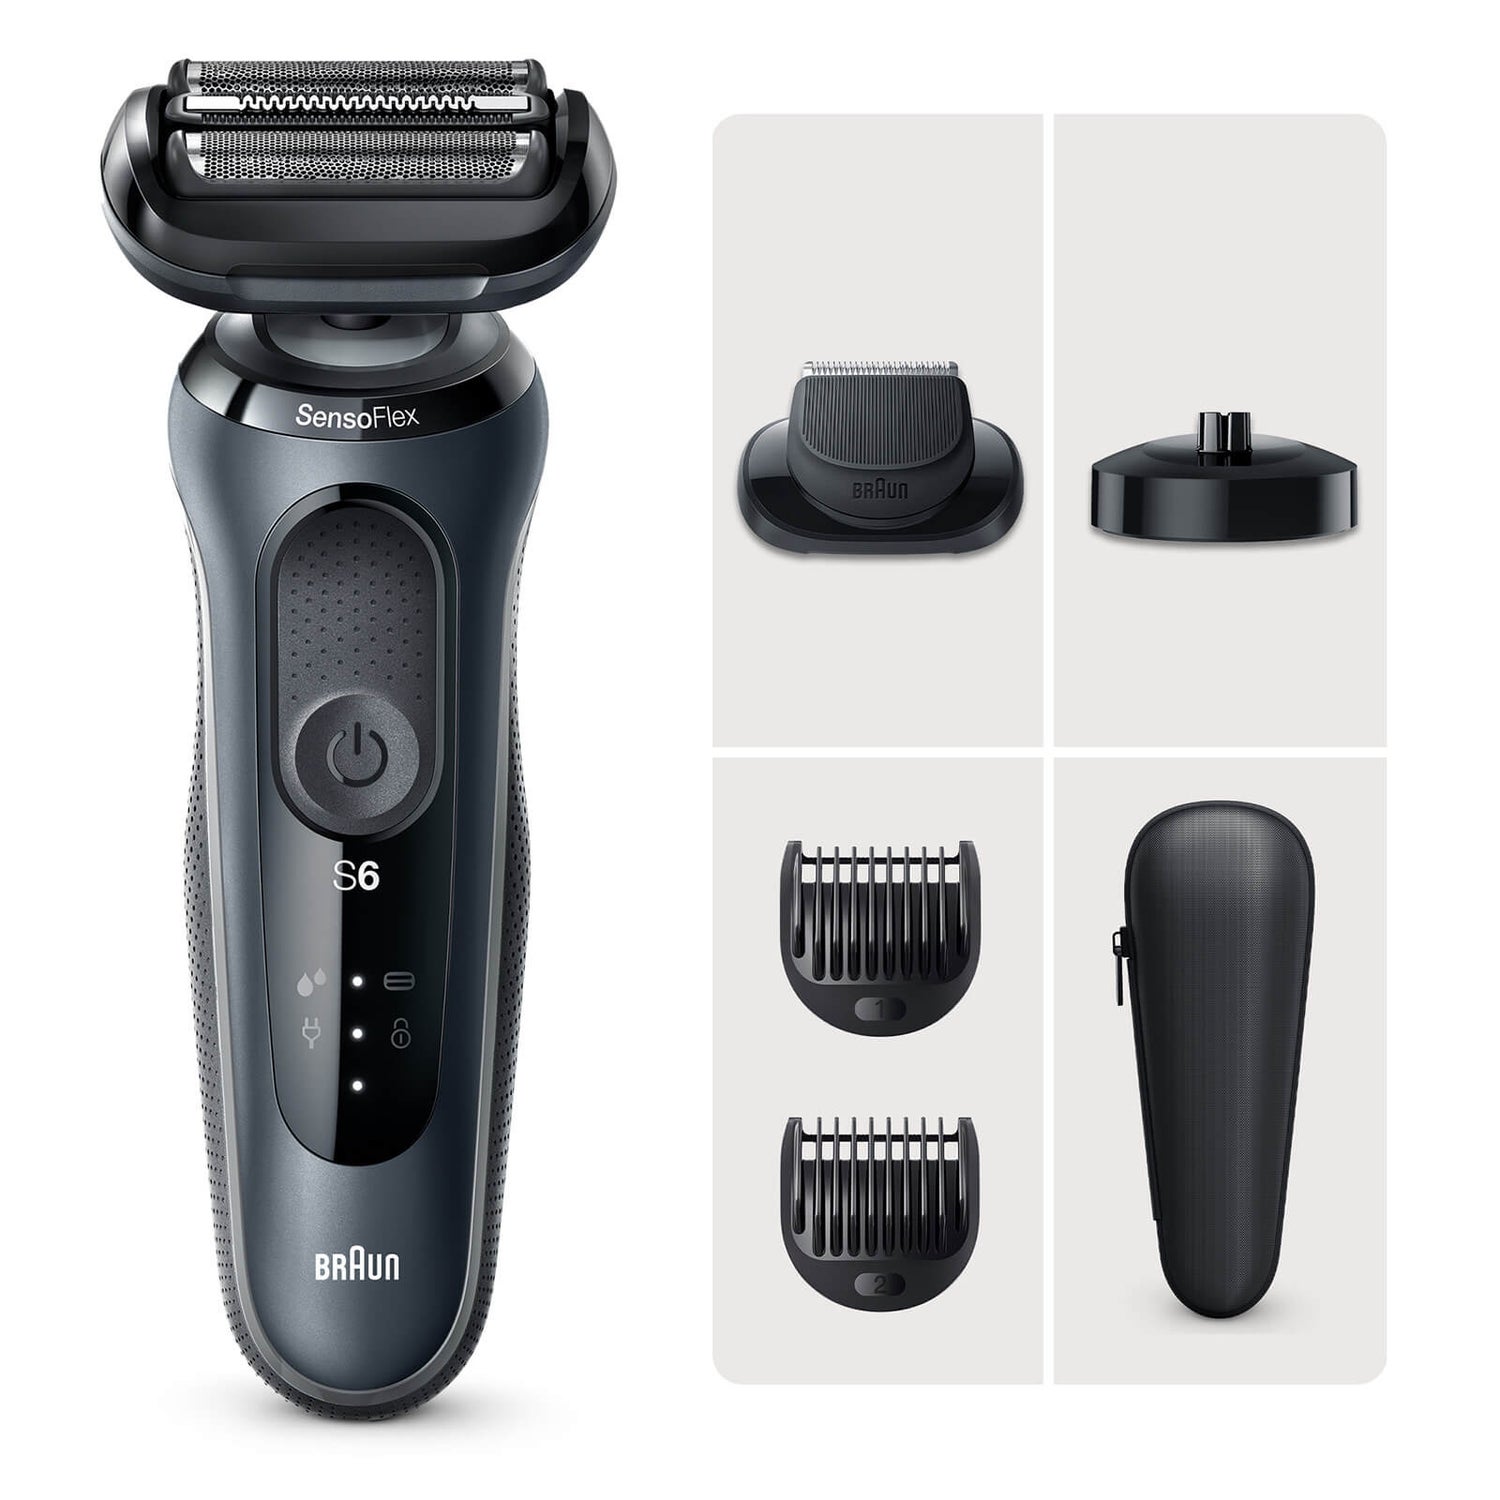 Braun Series 6 61-N4500cs Electric Shaver with Beard Trimmer, Charging Stand, Grey